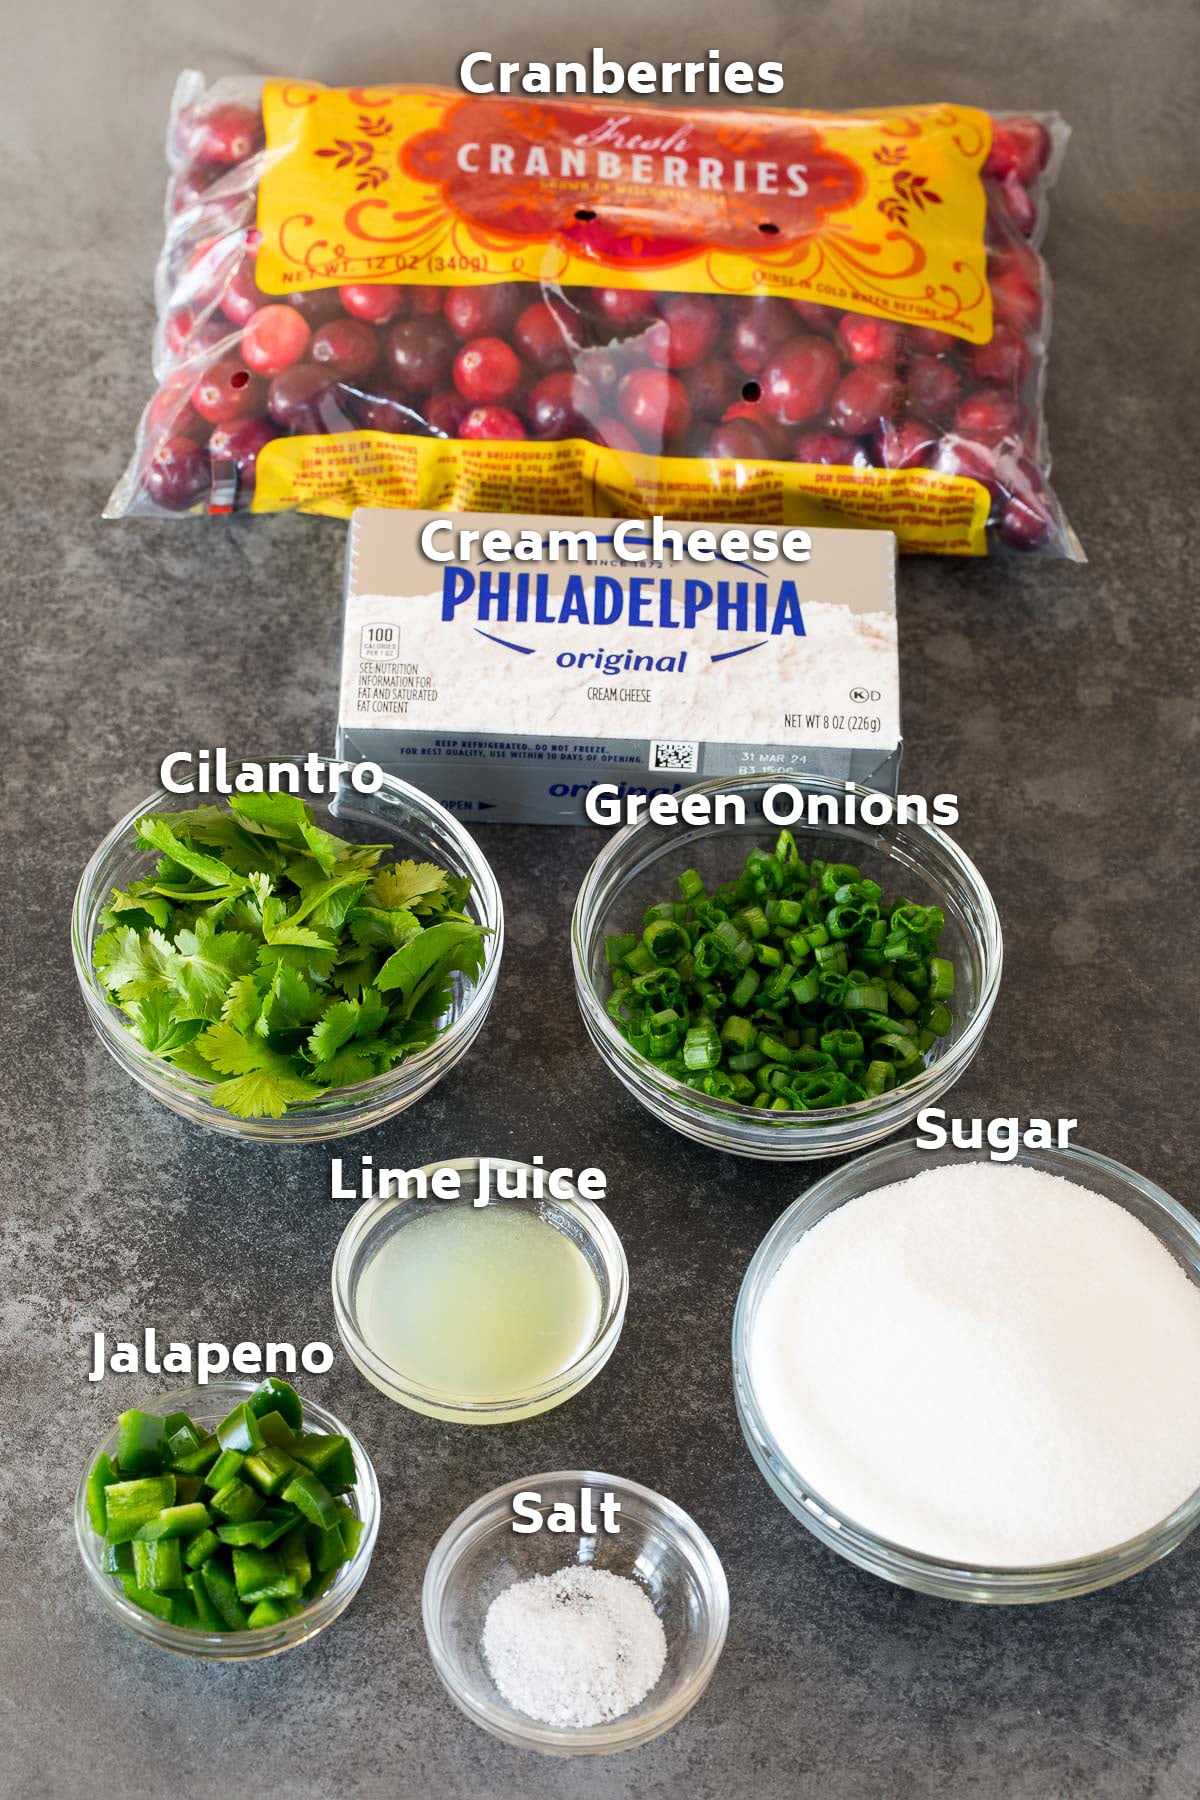 Ingredients including cranberries, cream cheese, cilantro, green onions and sugar.